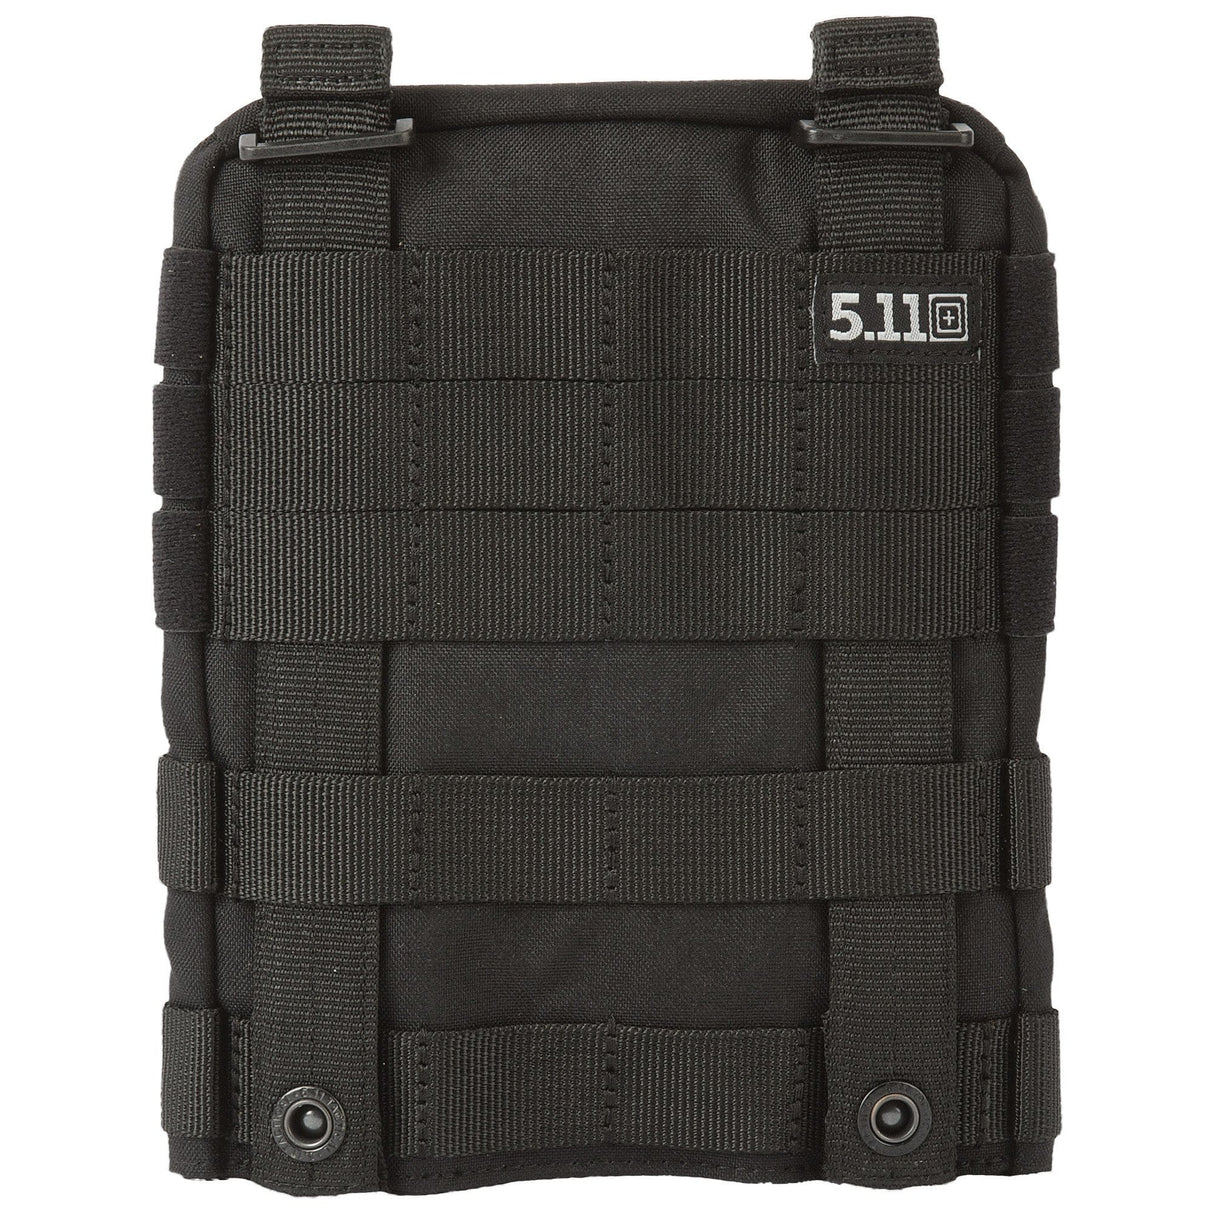 TACTEC™ PLATE CARRIER SIDE PANELS - 5.11 Tactical Finland Store